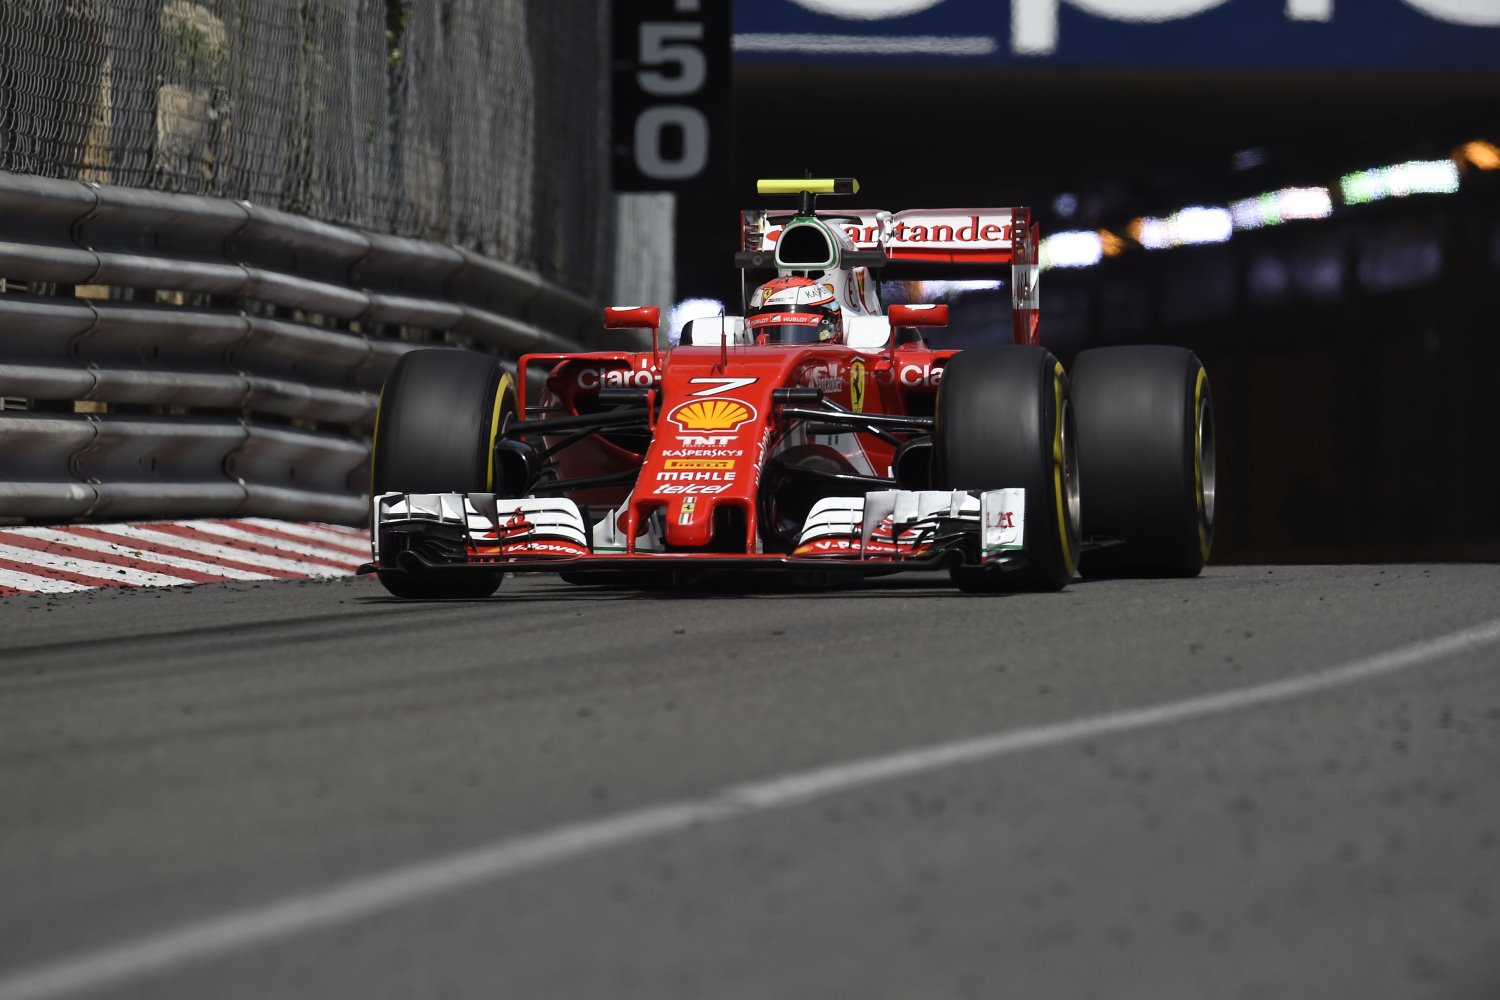 Ferrari in crisis mode as 2016 title now gone